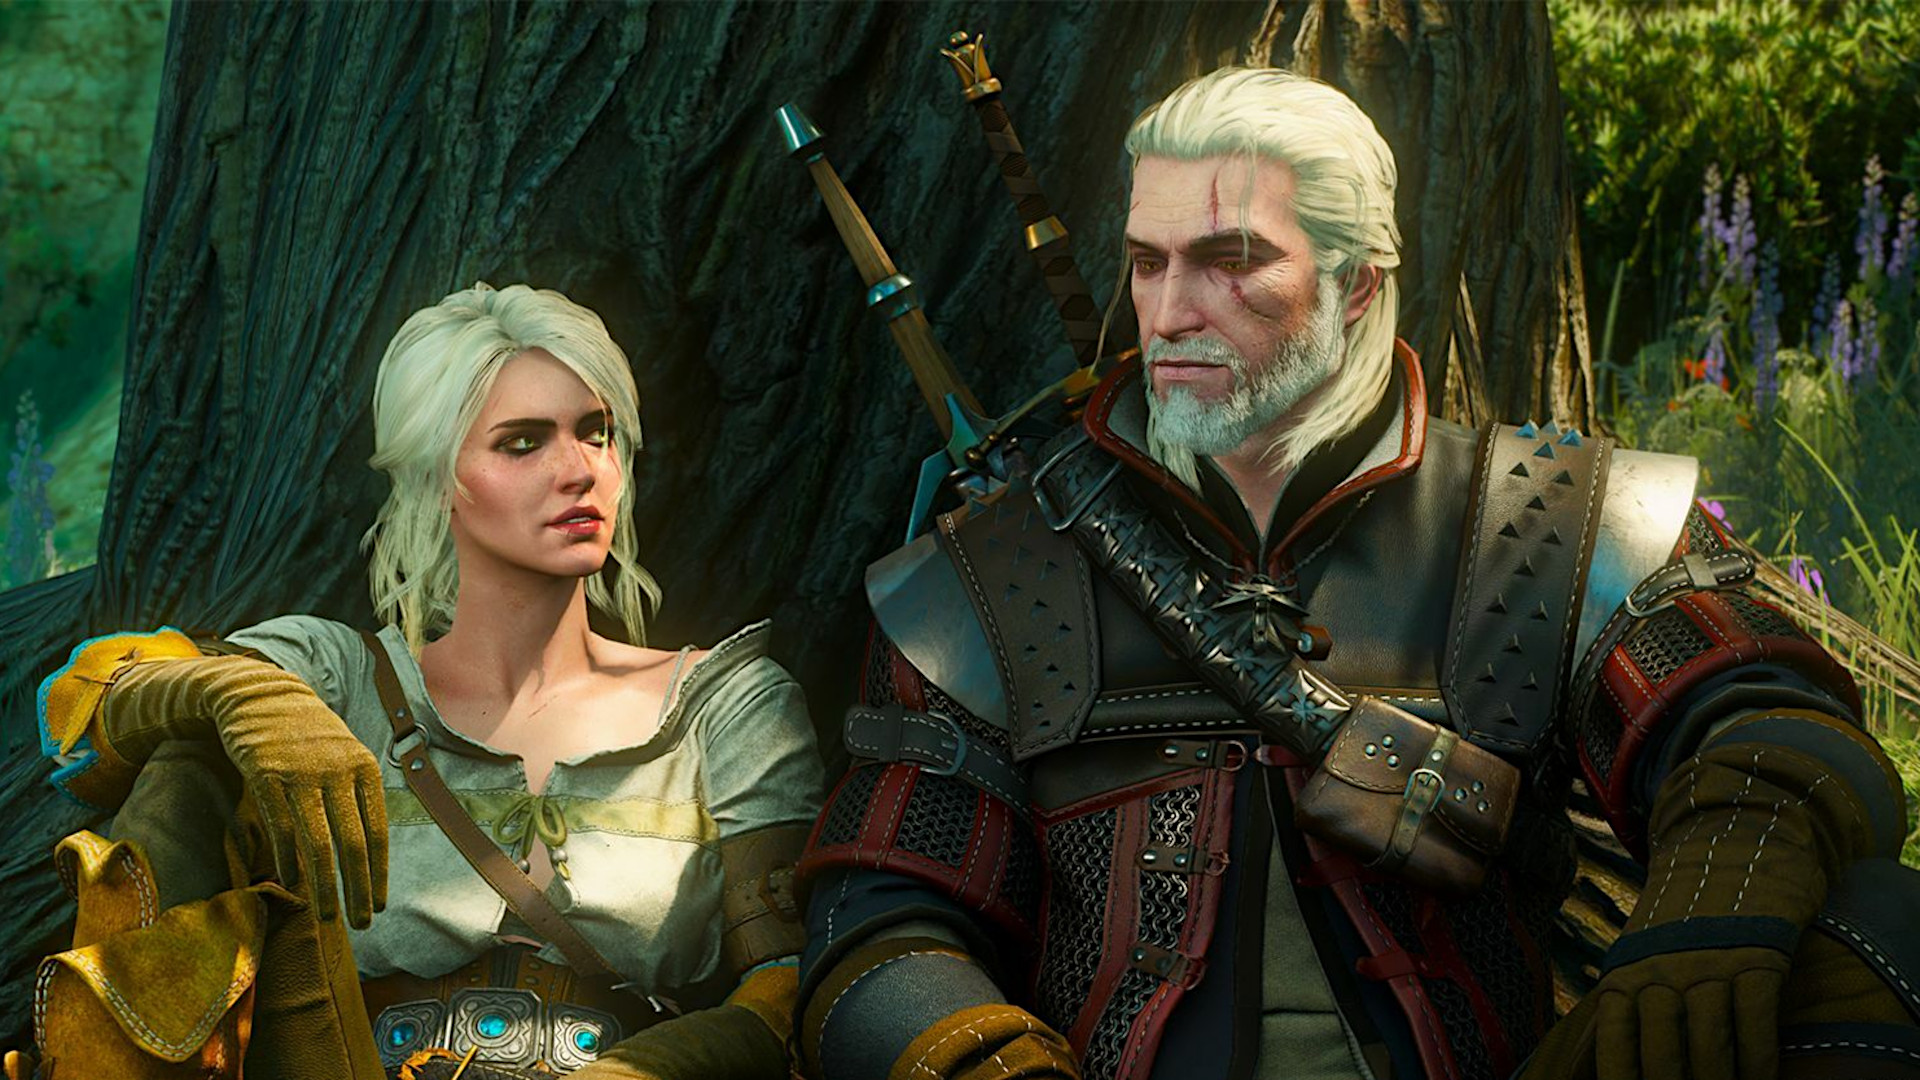 The Witcher 2 Gameplay - Internal video! 